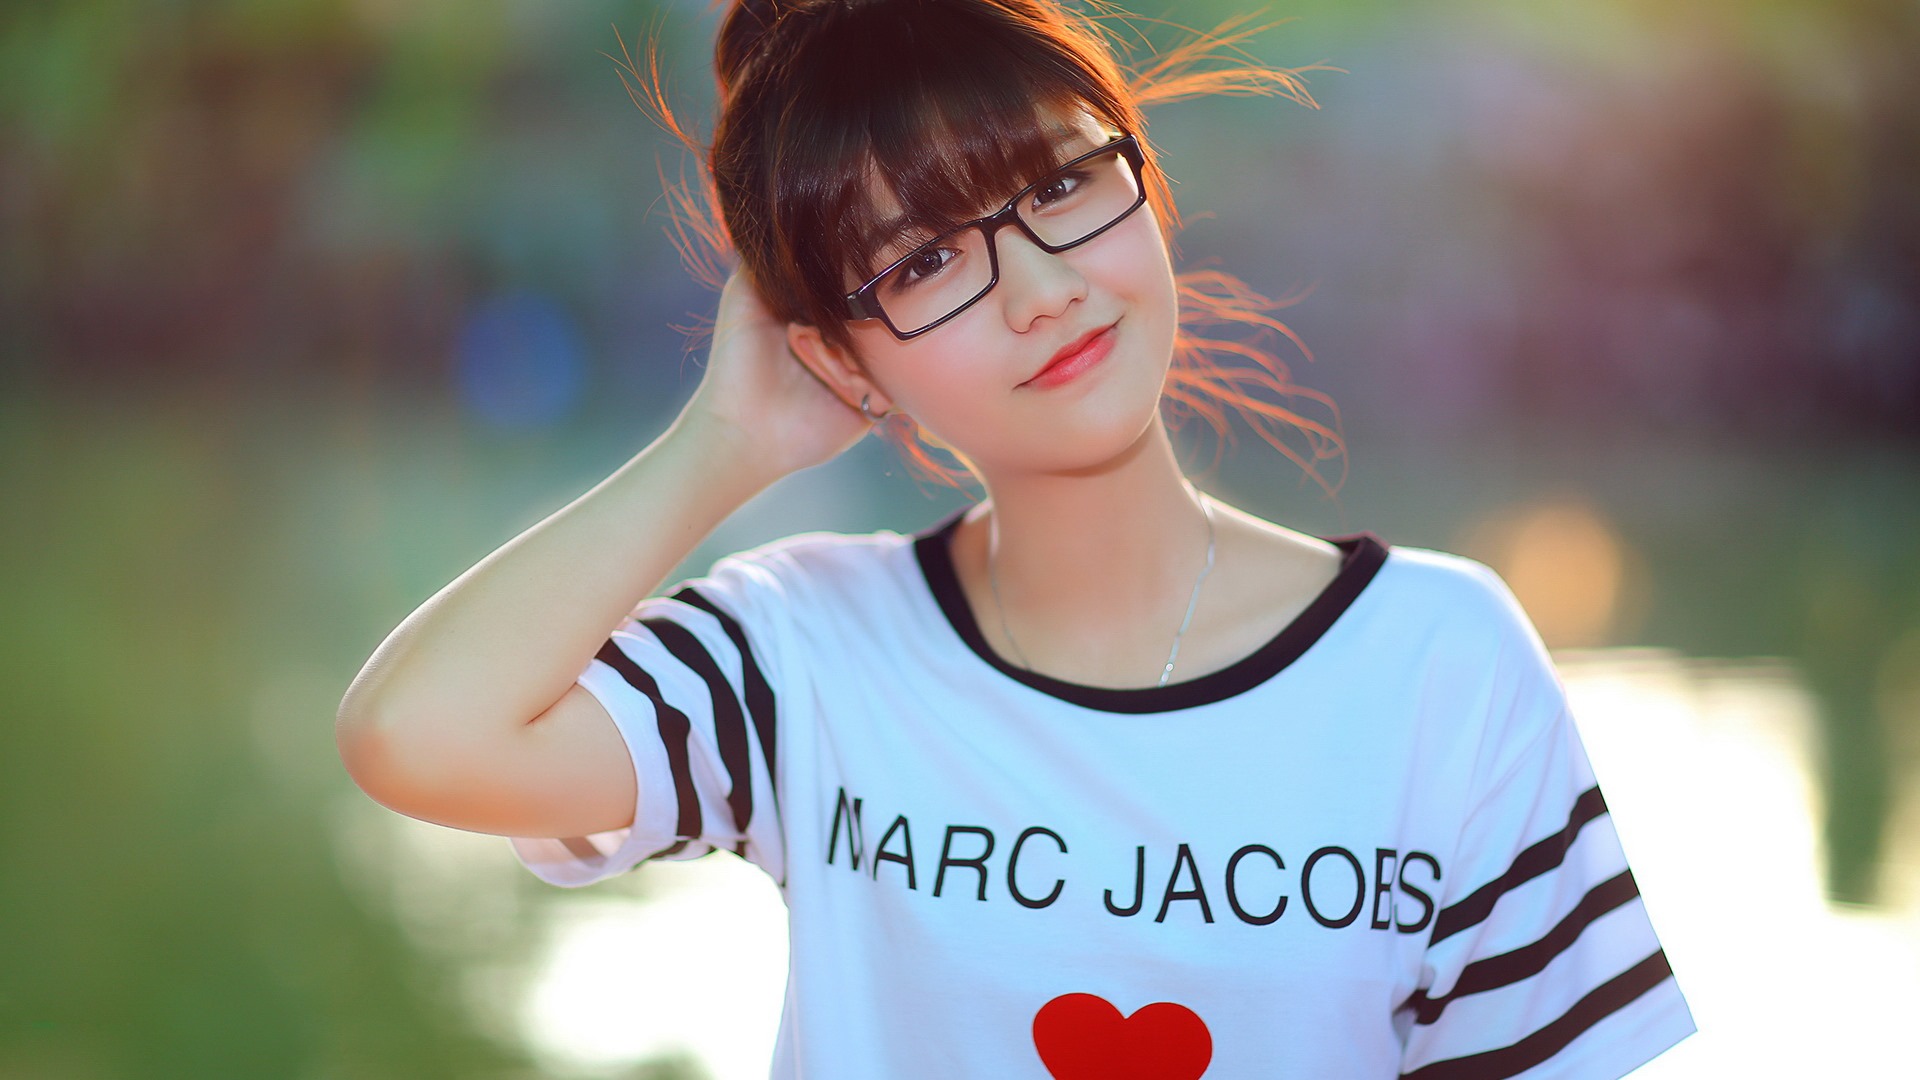 Pure and lovely young Asian girl HD wallpapers collection (4) #35 - 1920x1080